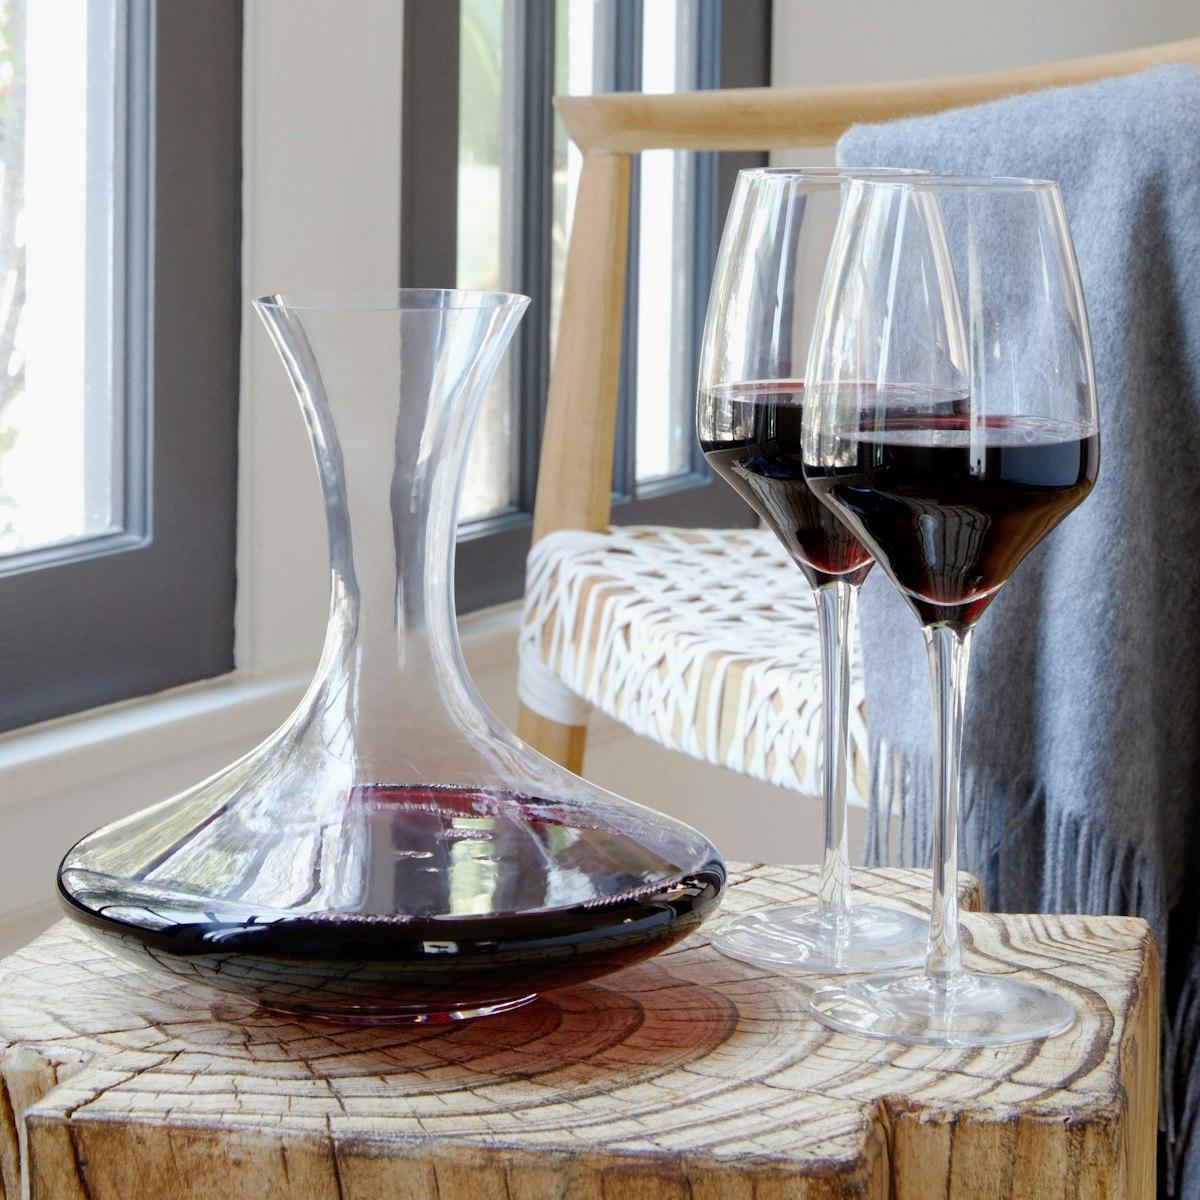 TerreWineDecanter_Clear_Home_Lifestyle_3x4_0126.jpg